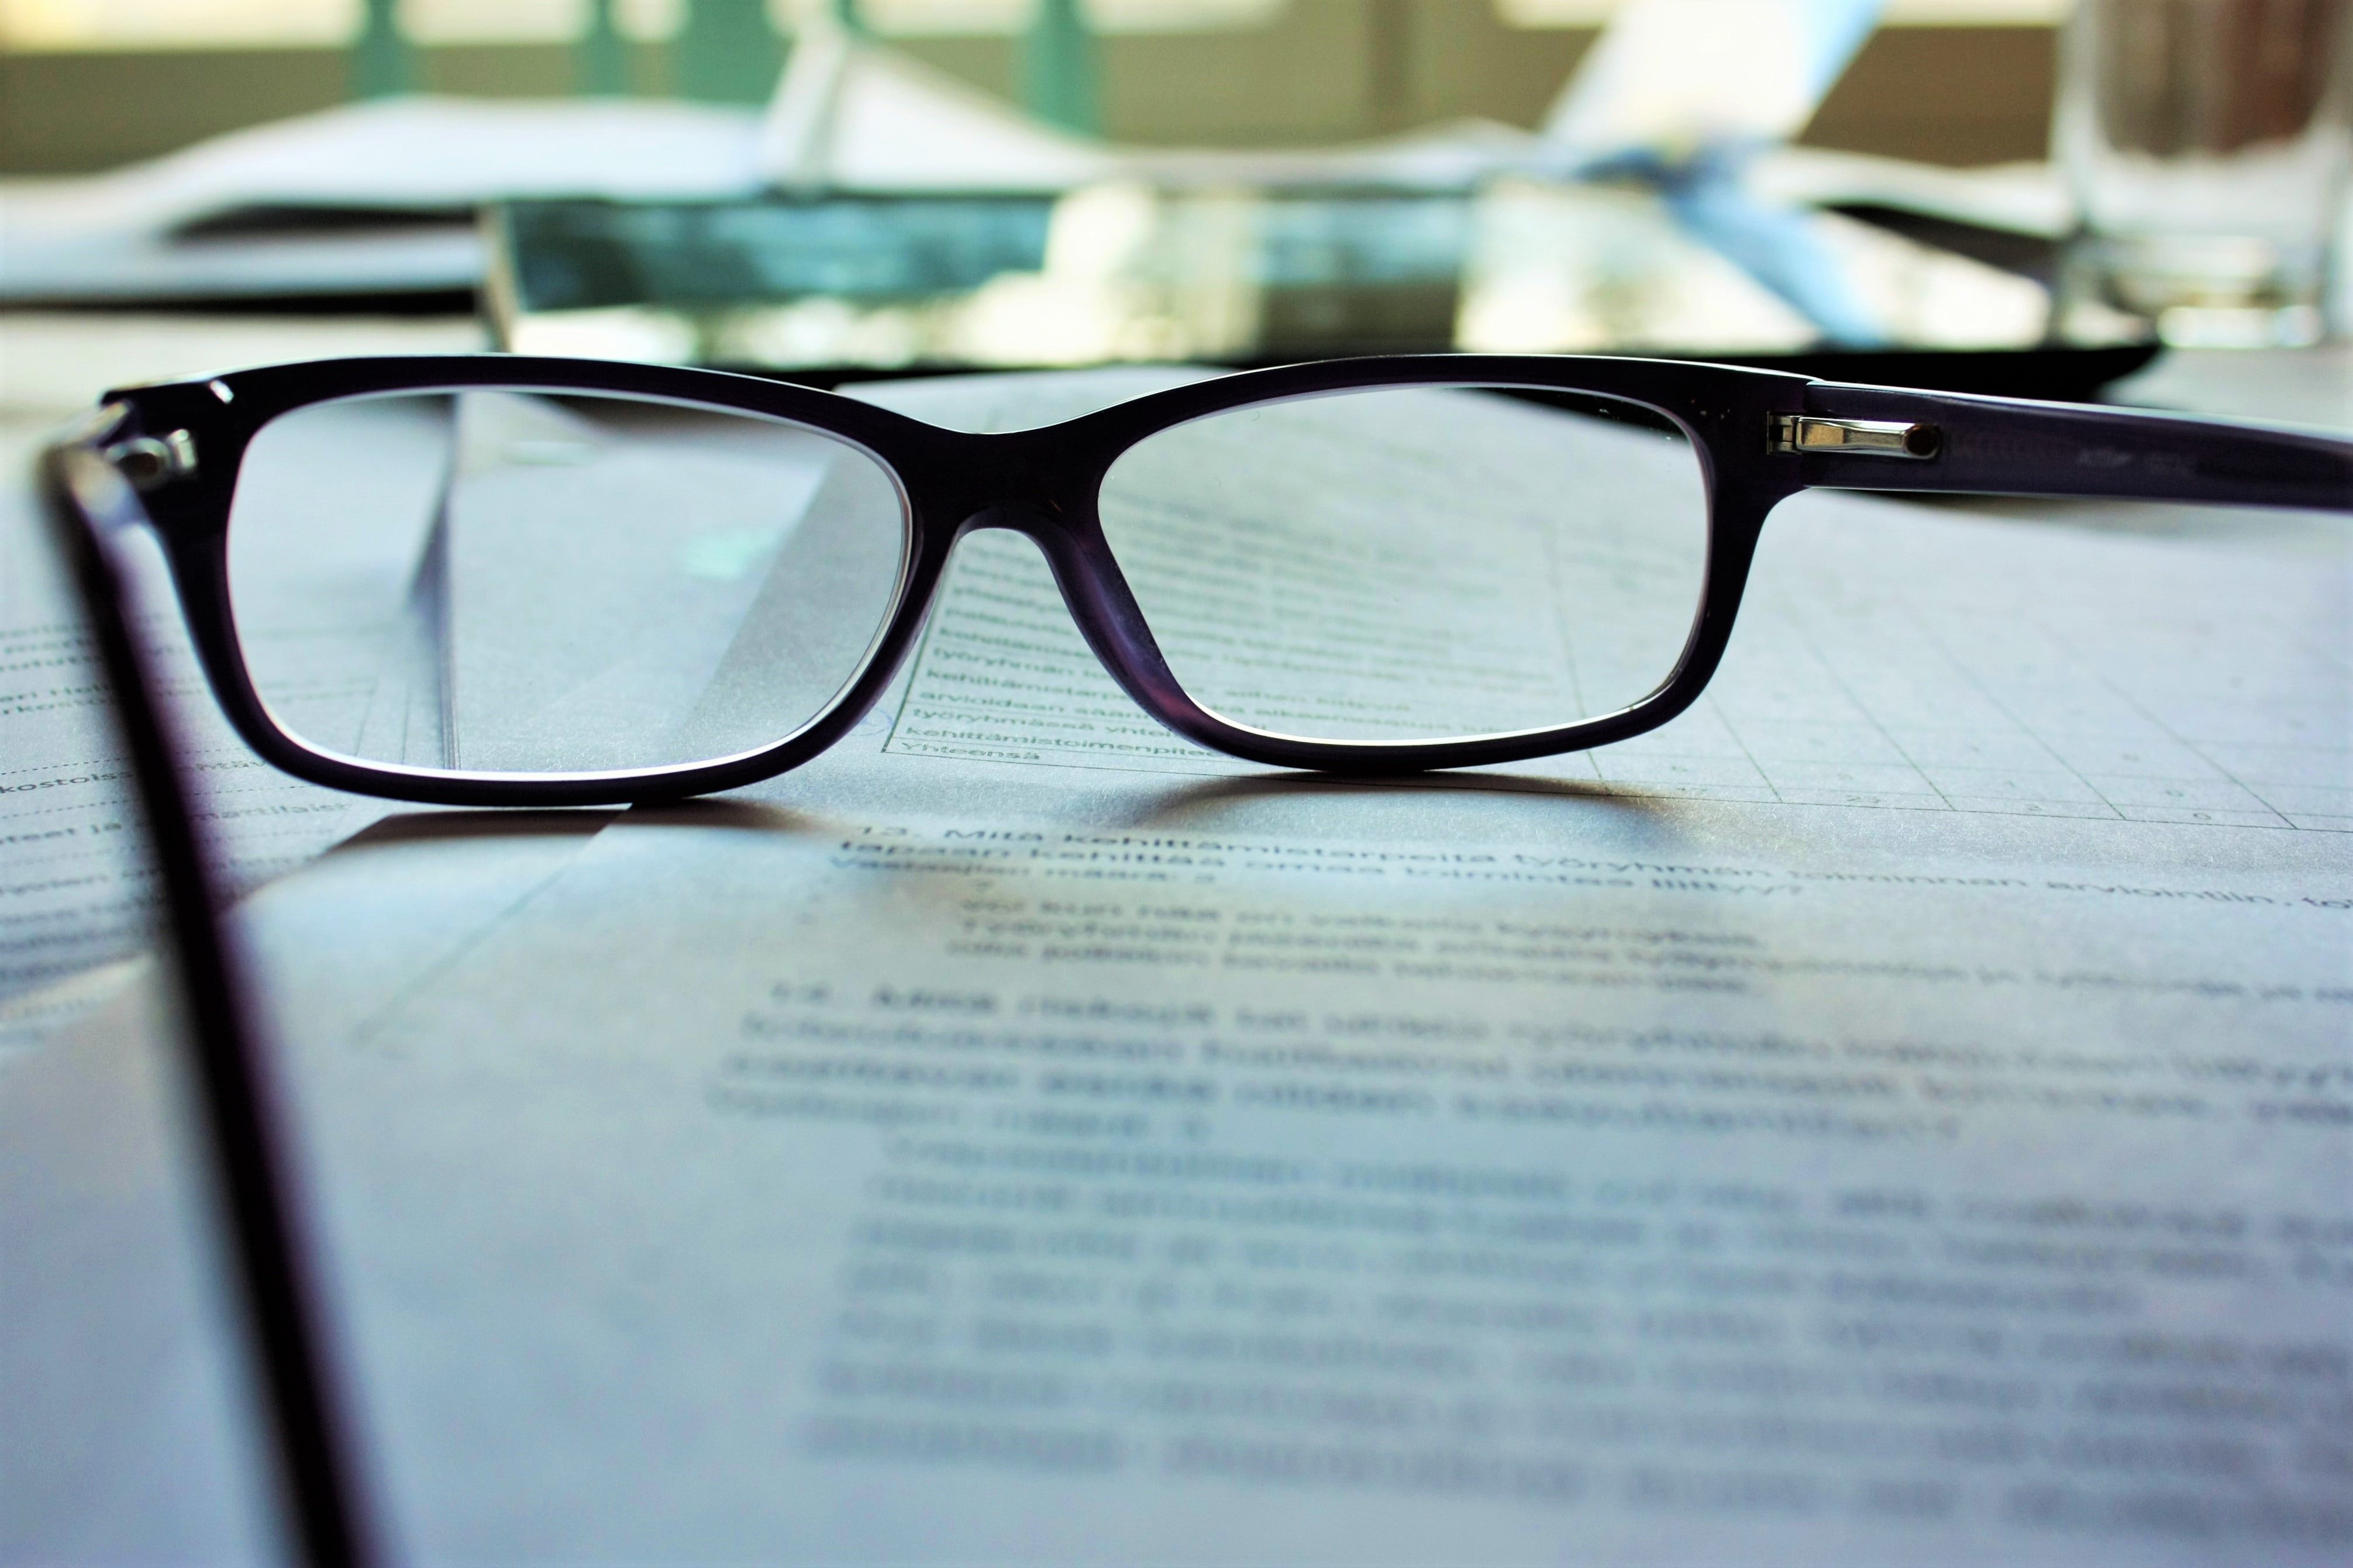 Reading glasses and papers | Source: Unsplash